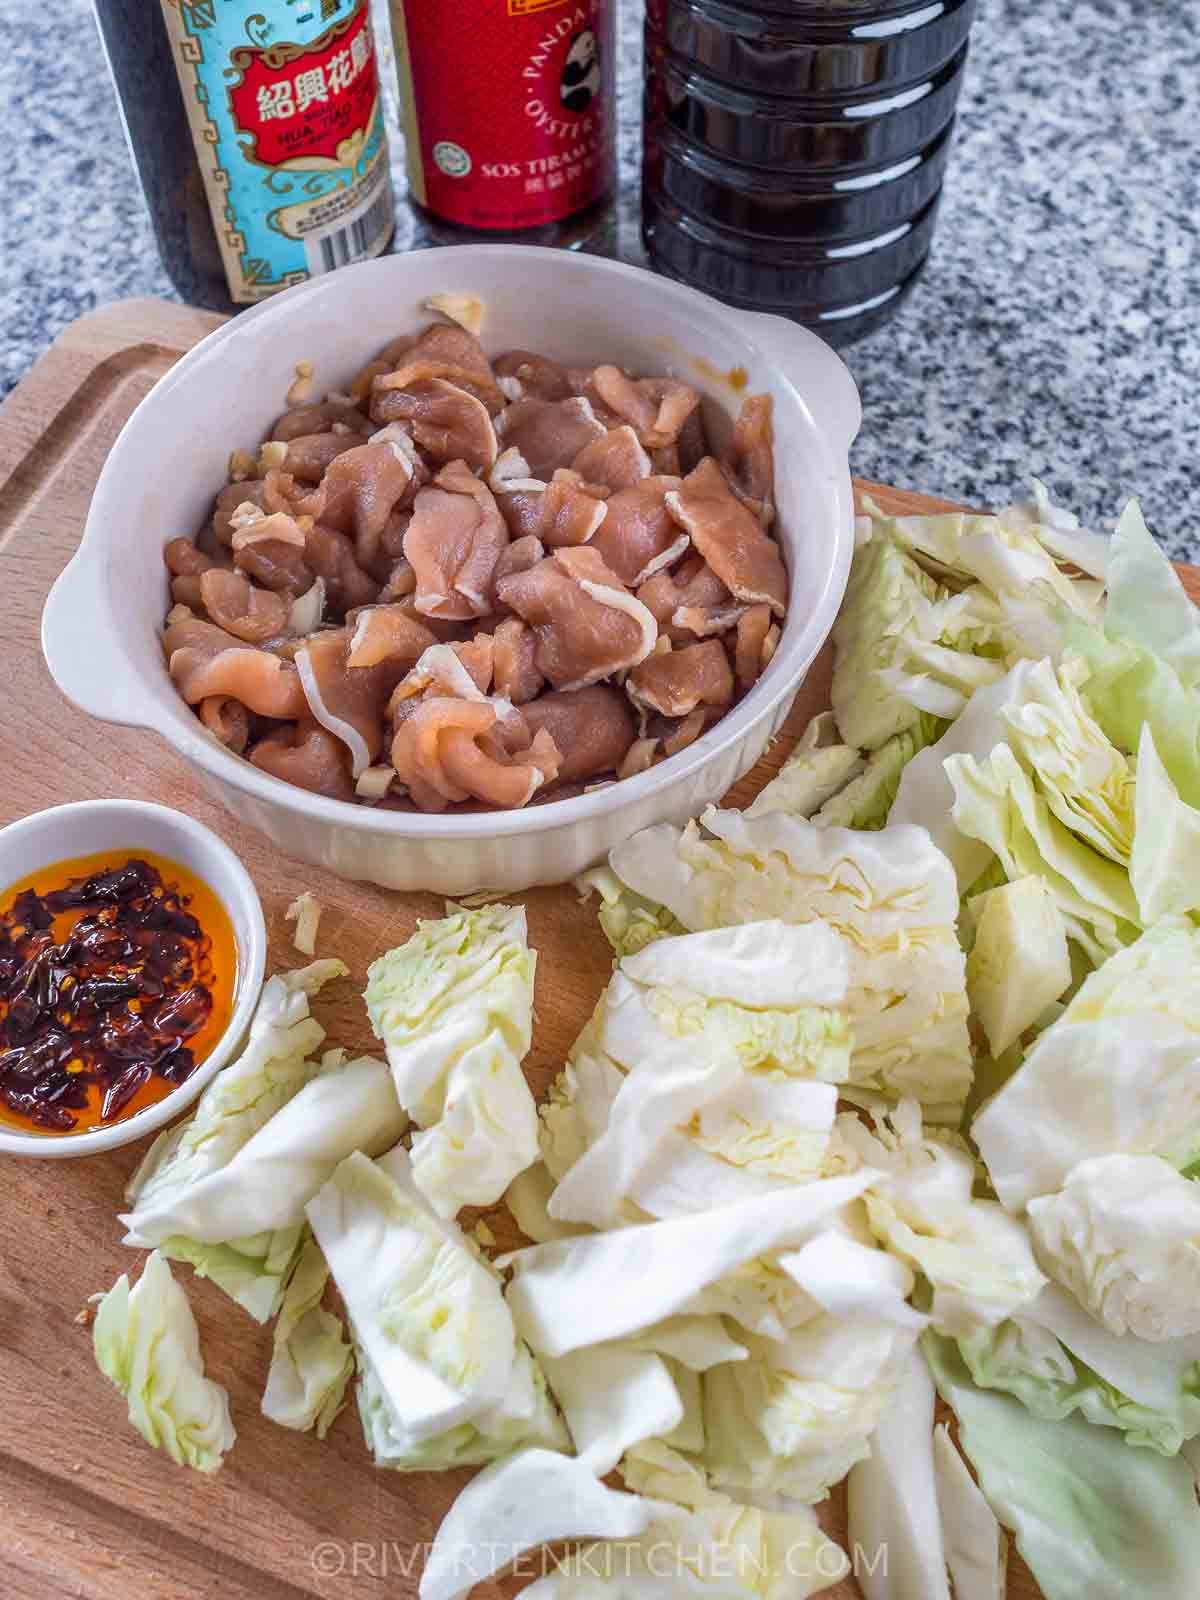 Pork, cabbage and Chinese stir-fry sauce